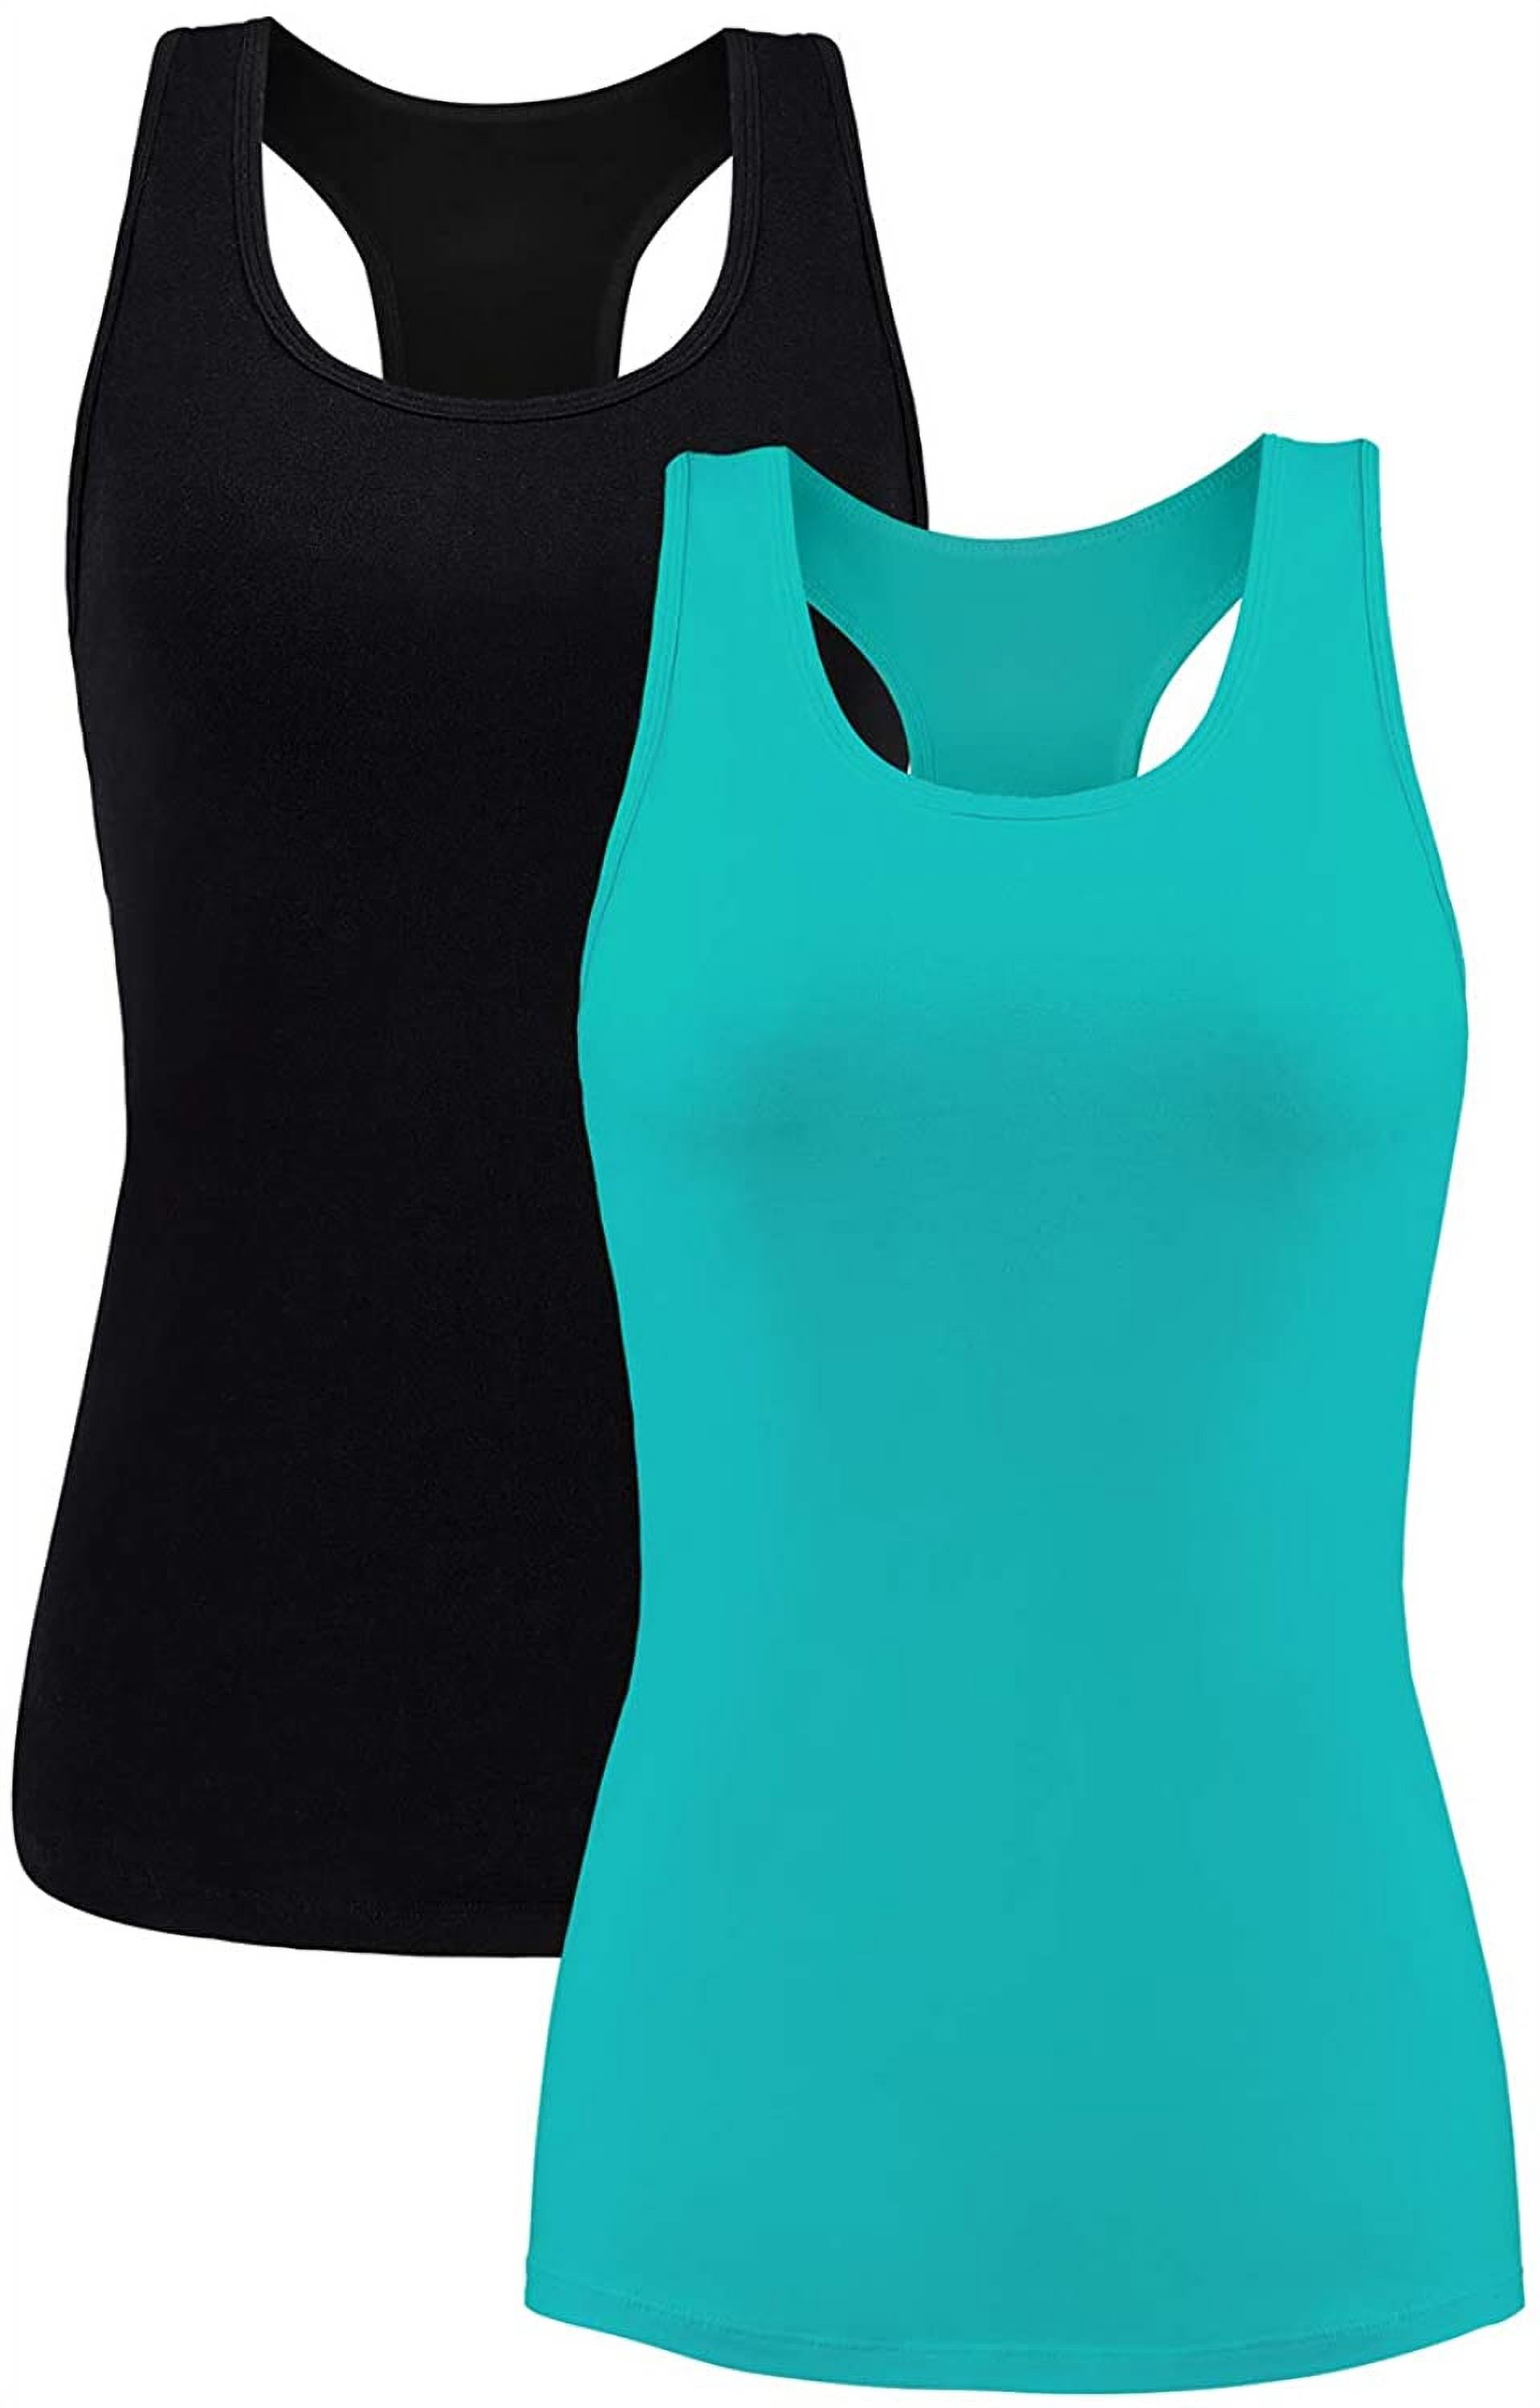 Charmo Women's Camisole Stretch Cotton Racerback Tank Top